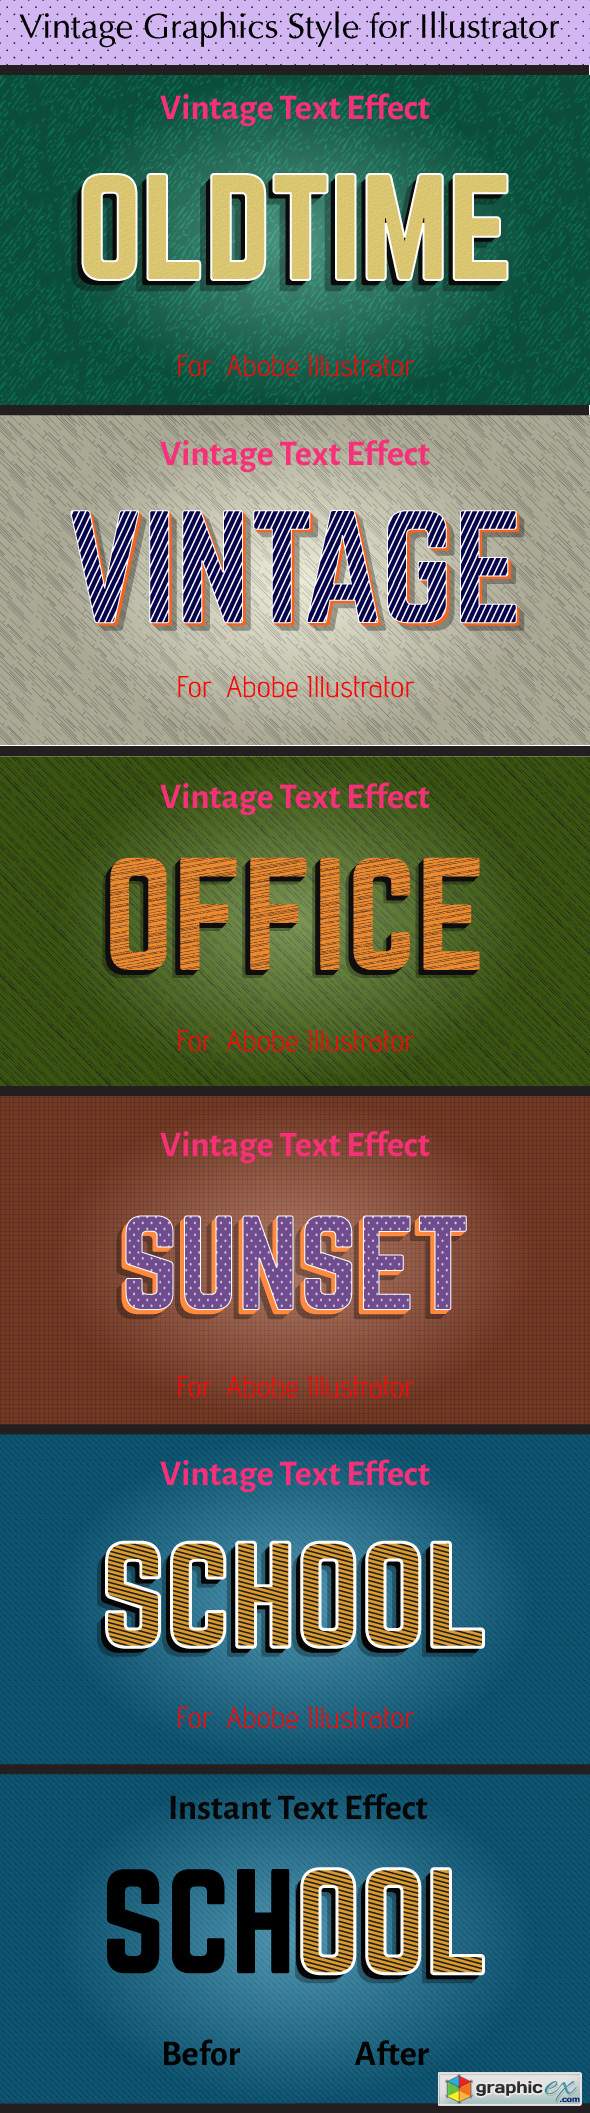 Vintage Graphics Style for Illustrator